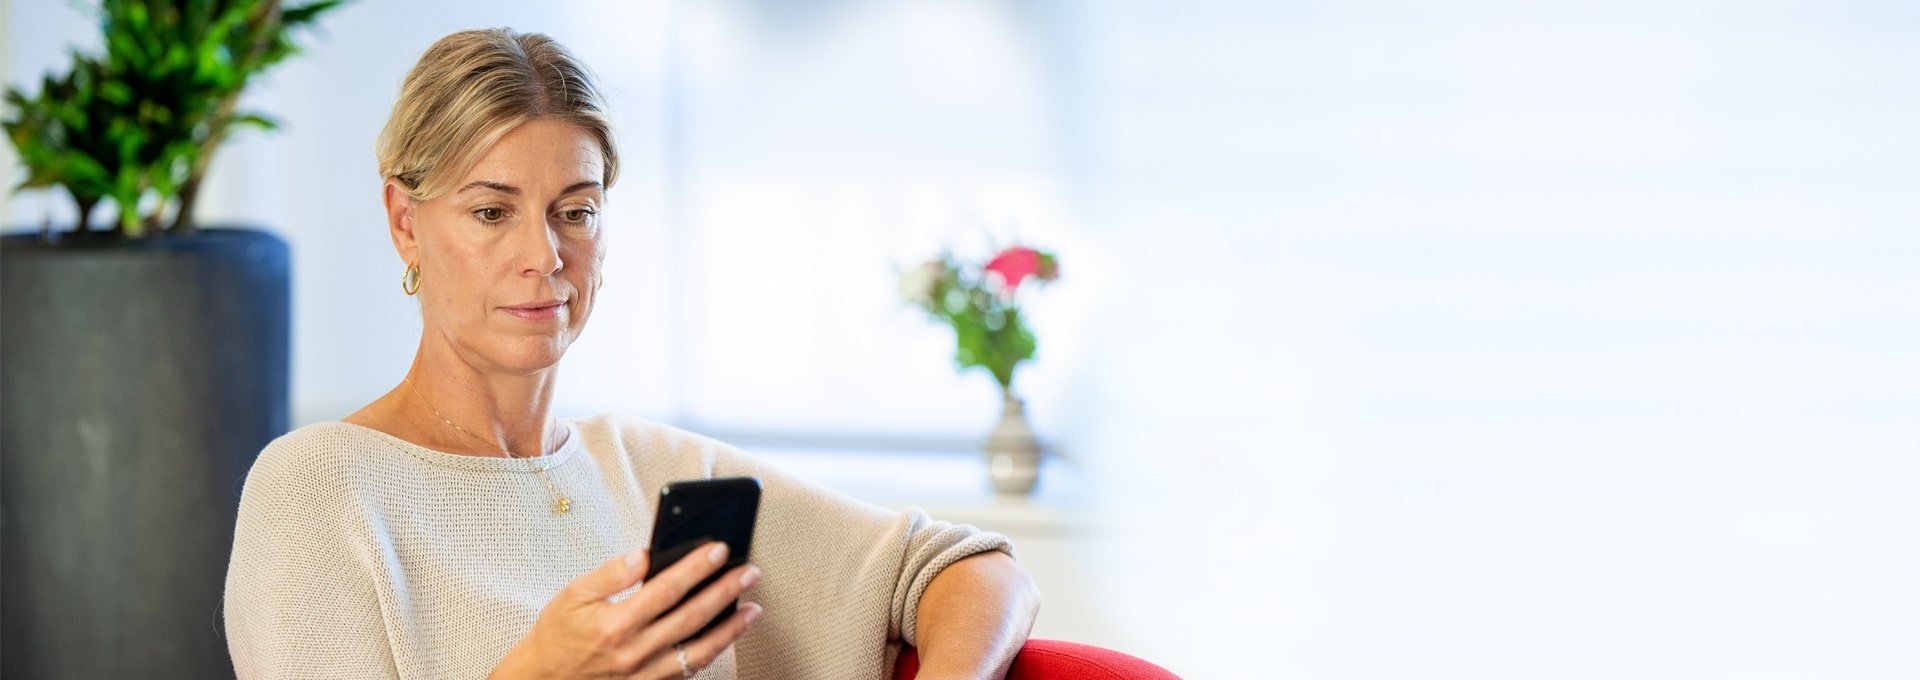 Smiling and relaxed woman looking at her smartphone